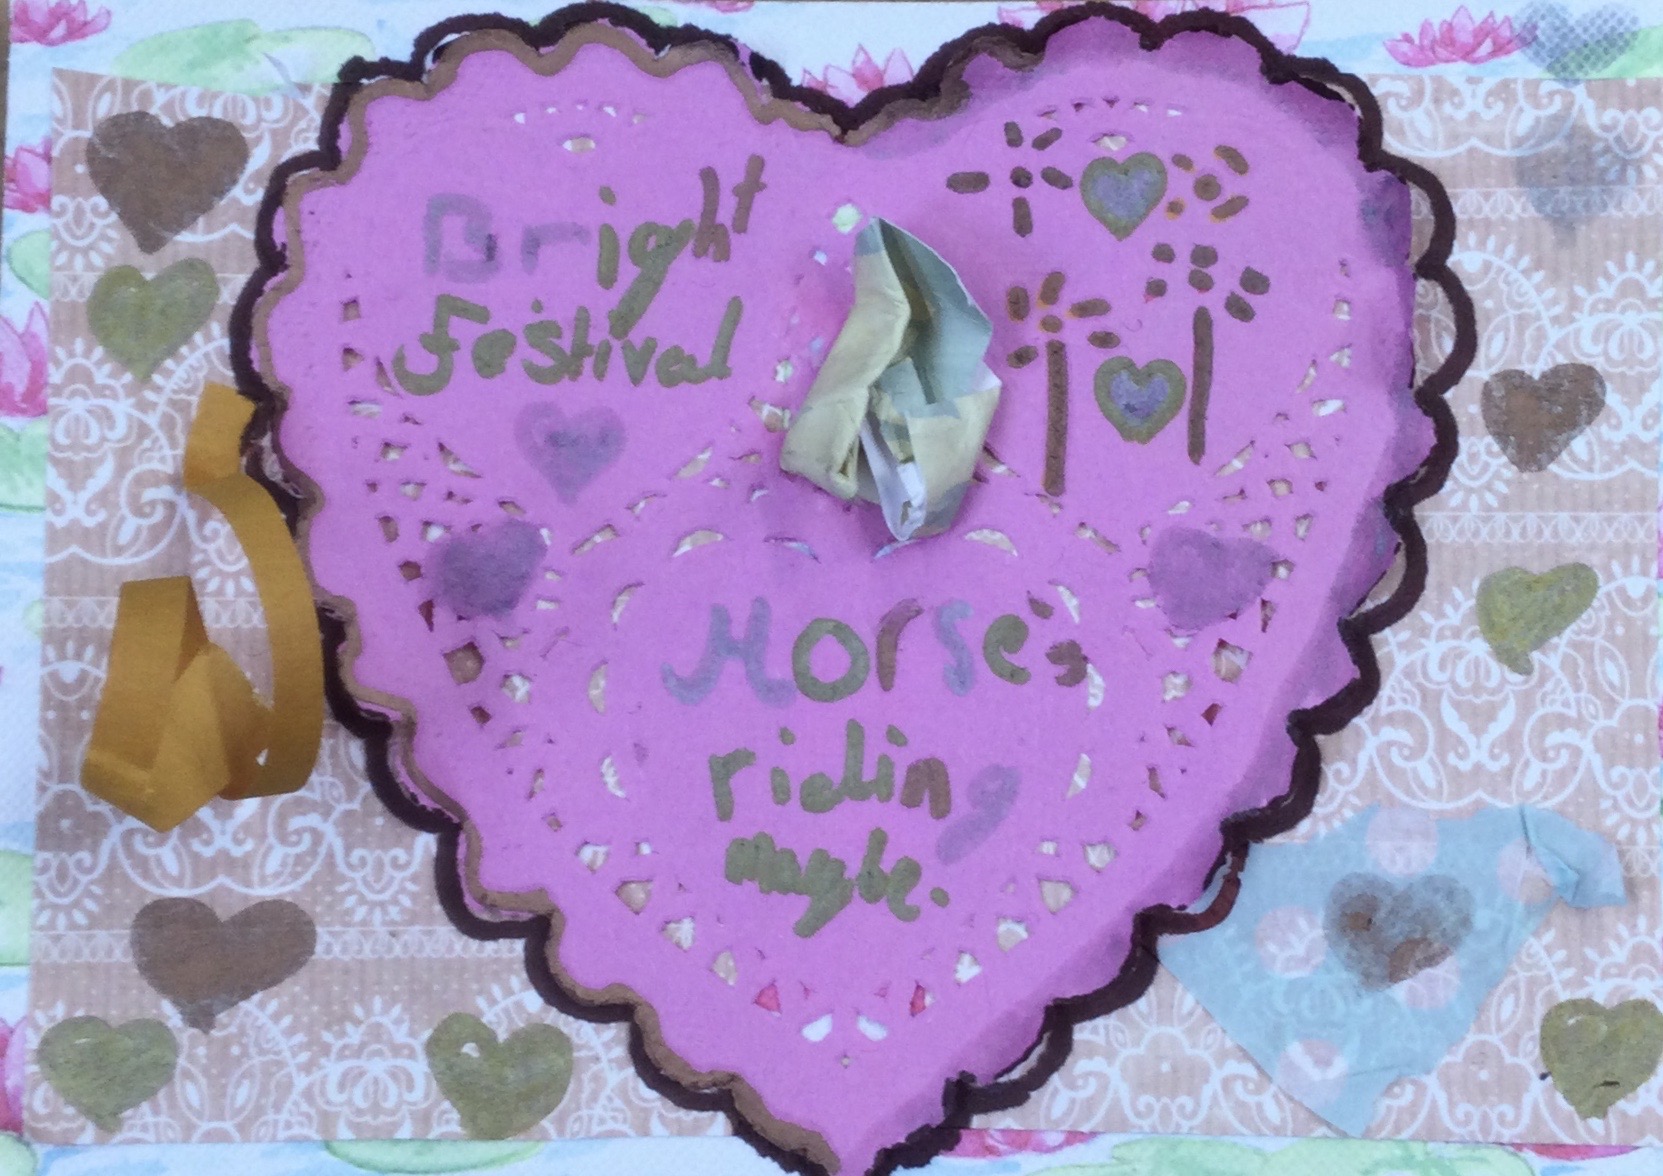 A large pink heart bearing the words Bright Festival and Horse riding maybe fills the centre of the card and is surrounded by smaller, hand-drawn hearts and embellishments of tape and scrumpled paper